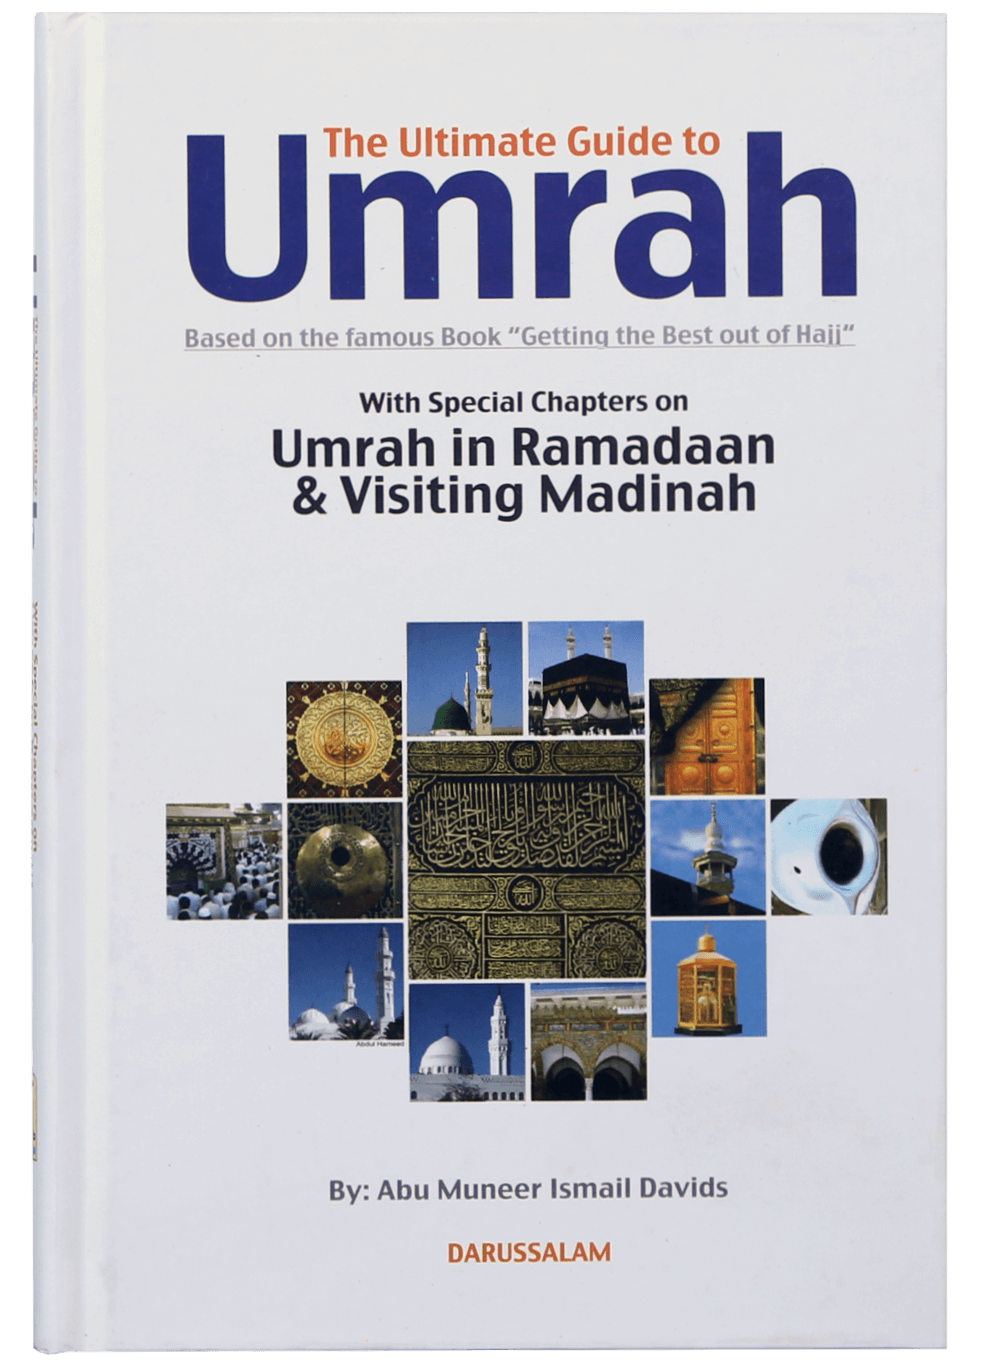 darussalam-2017-10-04-11-40-41the-ultimate-guide-to-umrah-(1)